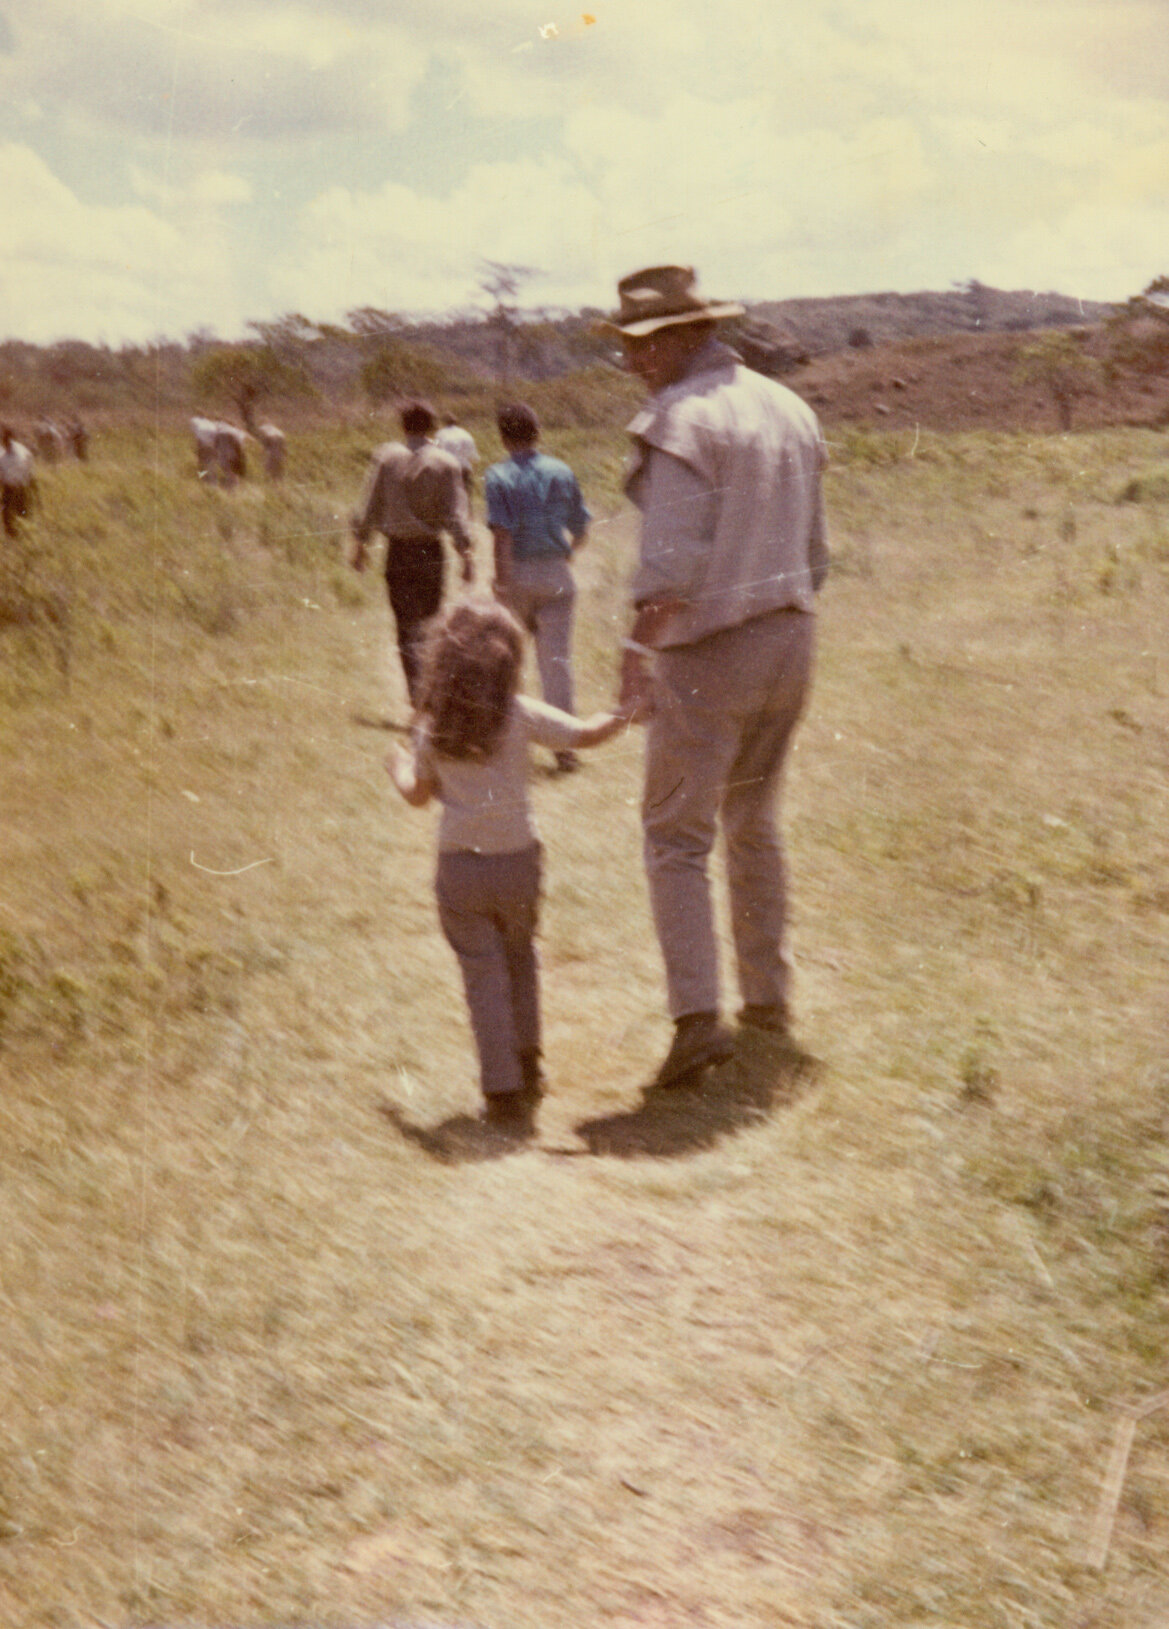 Aissa and her dad walk hand-in-hand in Africa.